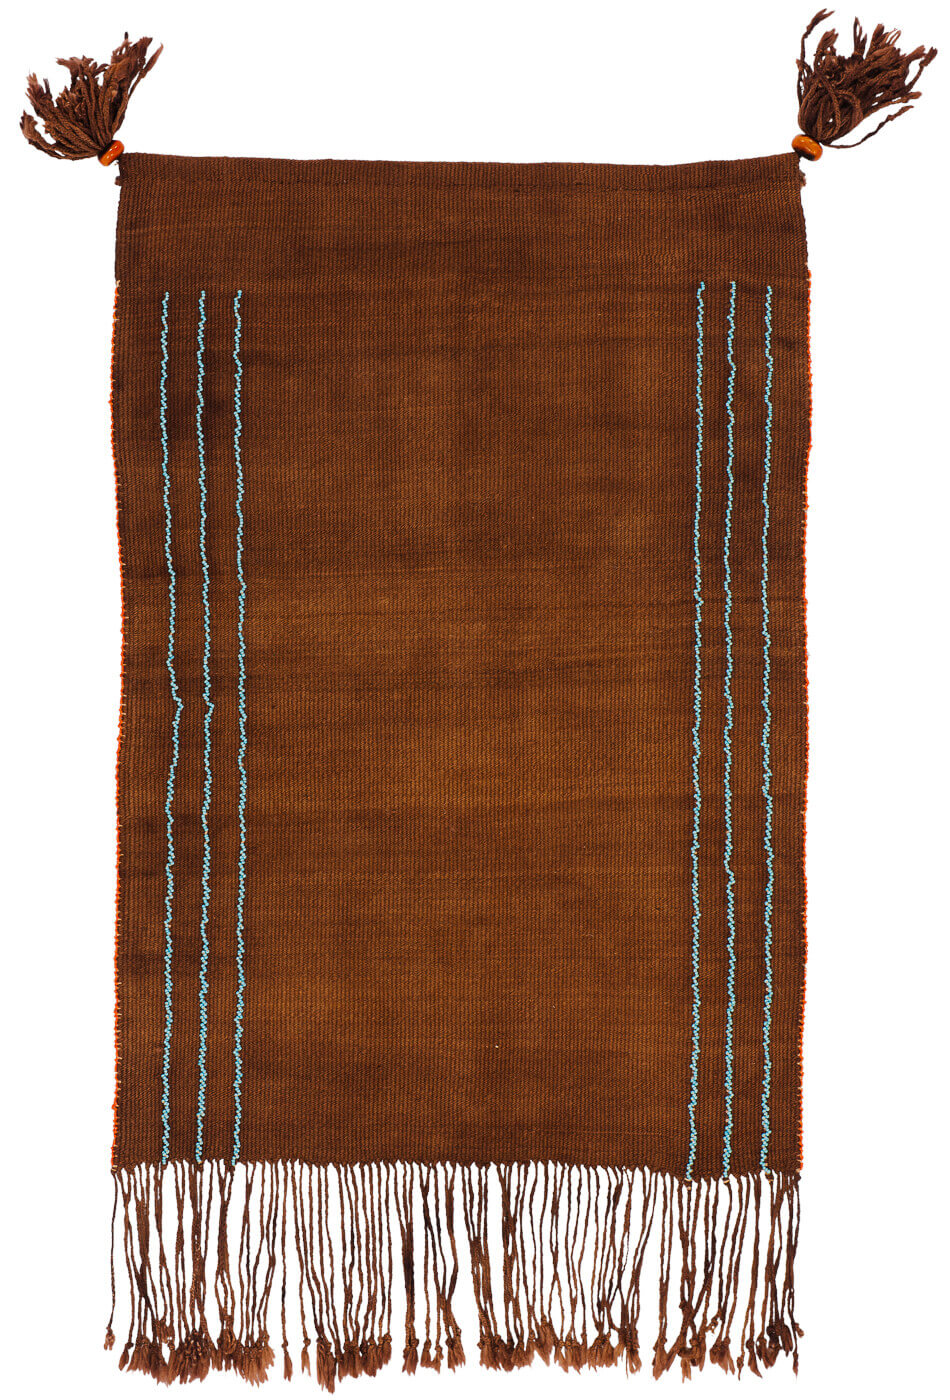 Tribal Brown / Blue Luxury Hand-woven Rug ☞ Size: 300 x 400 cm